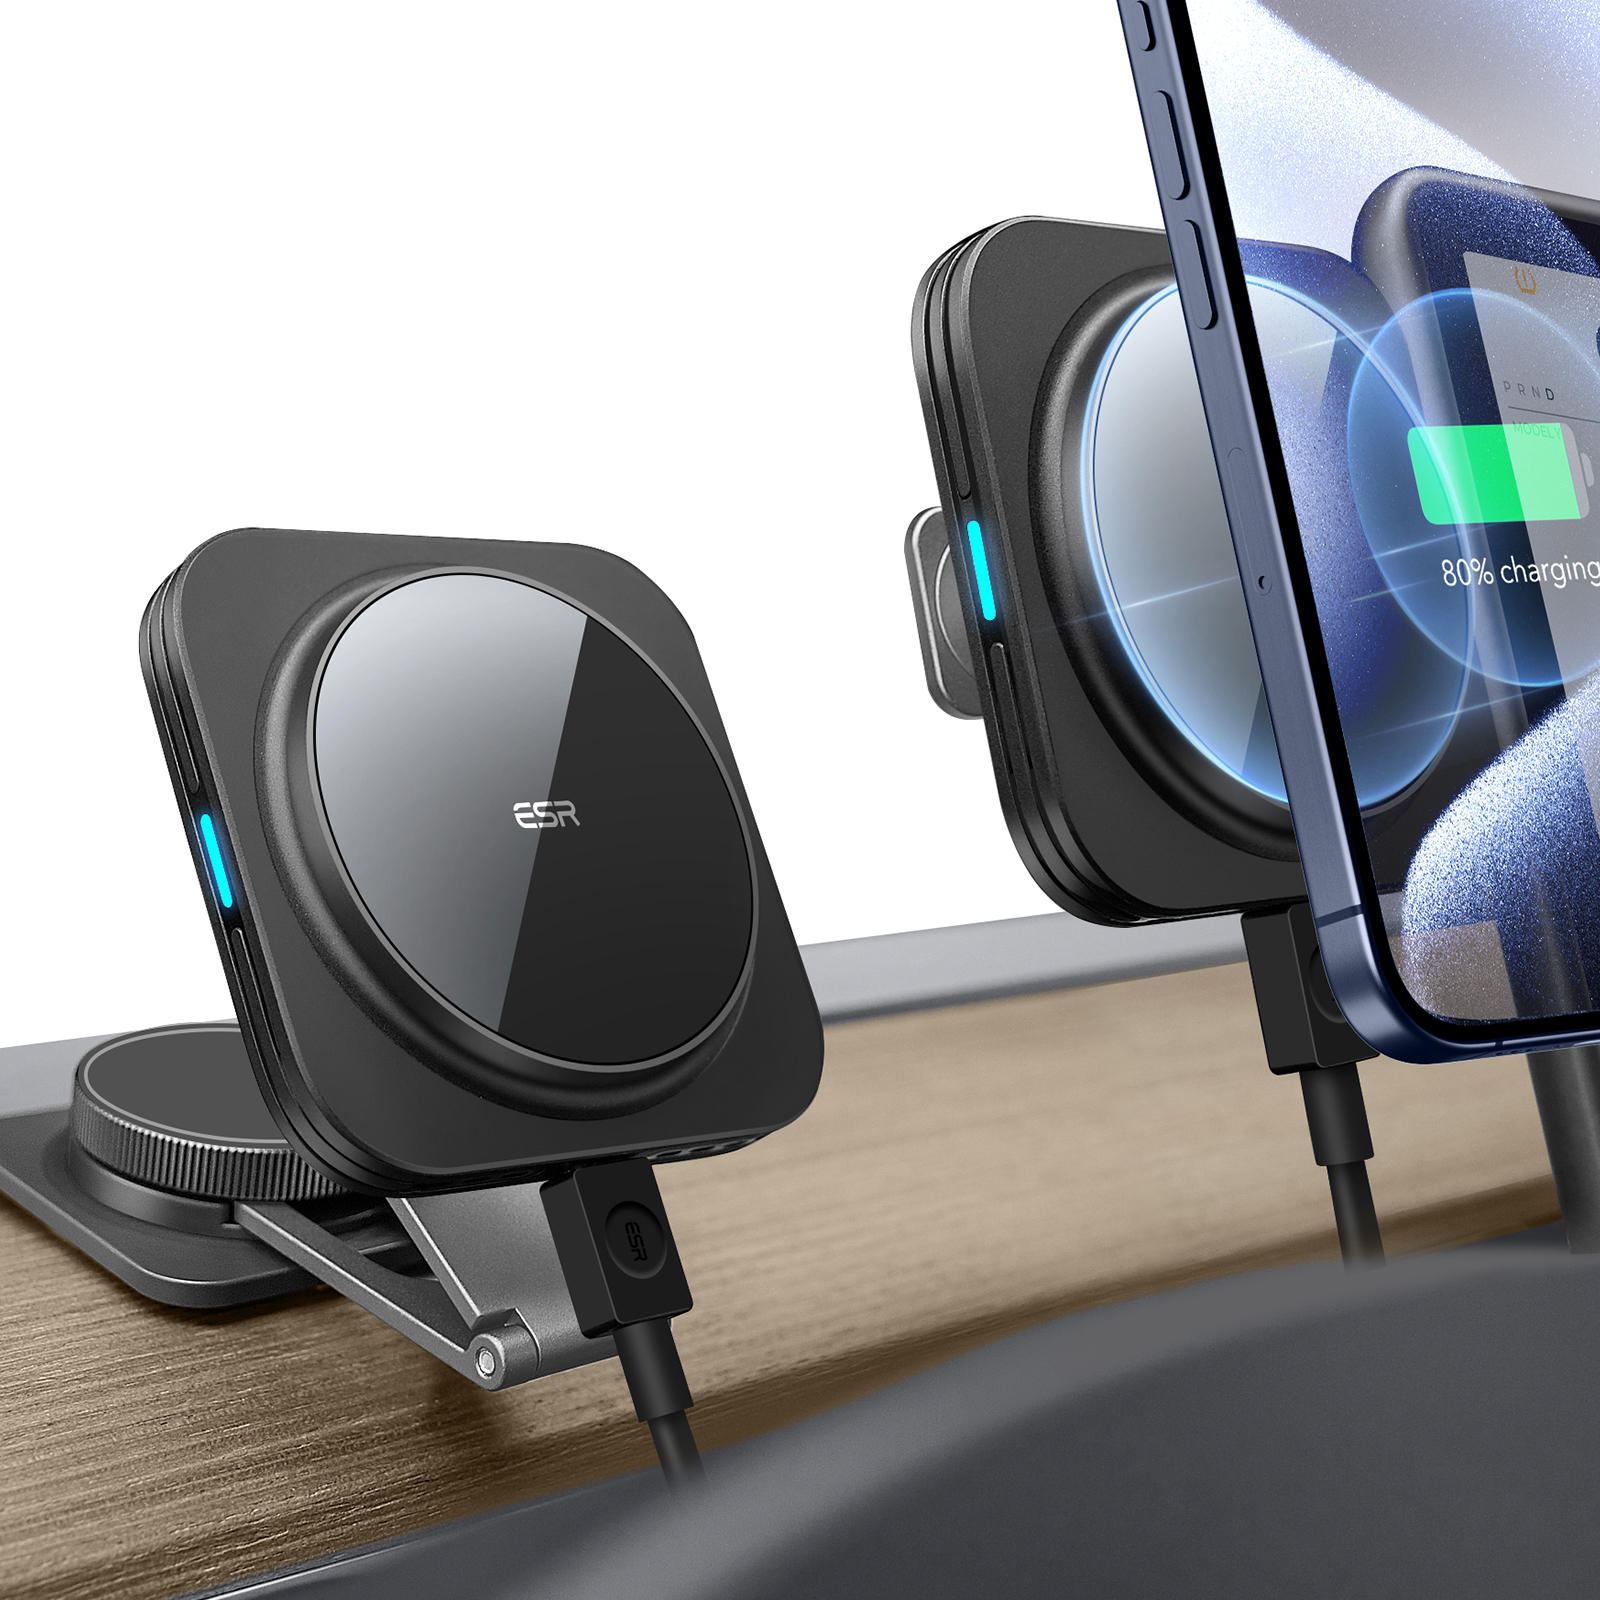 ESR HaloLock Shift Wireless Car Charger, Compatible with MagSafe